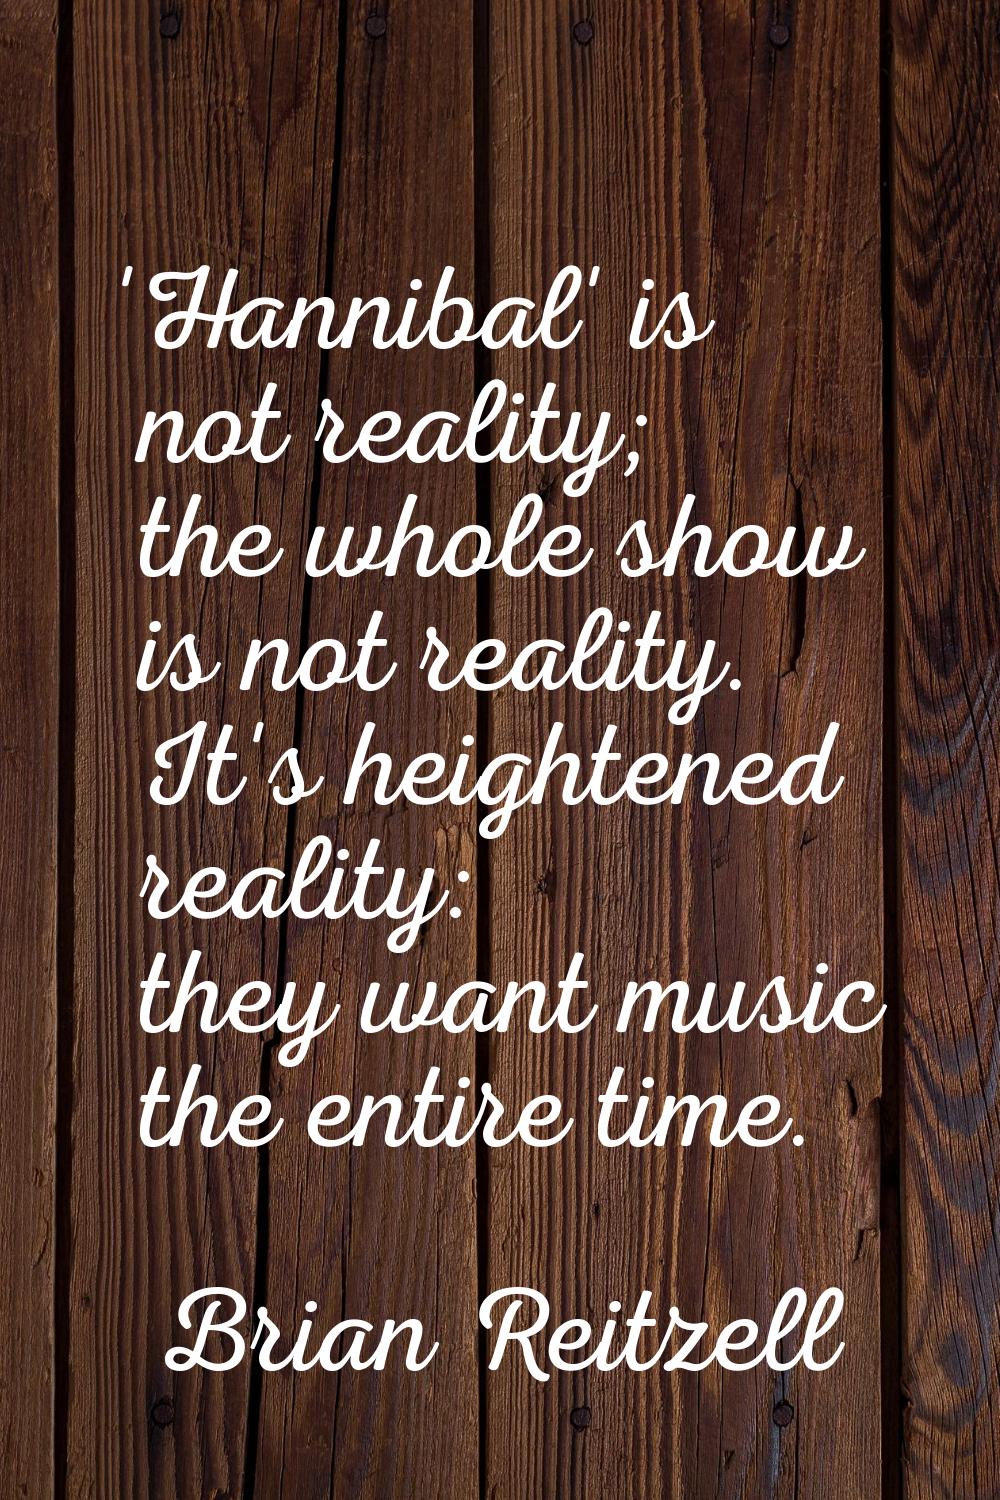 'Hannibal' is not reality; the whole show is not reality. It's heightened reality: they want music 